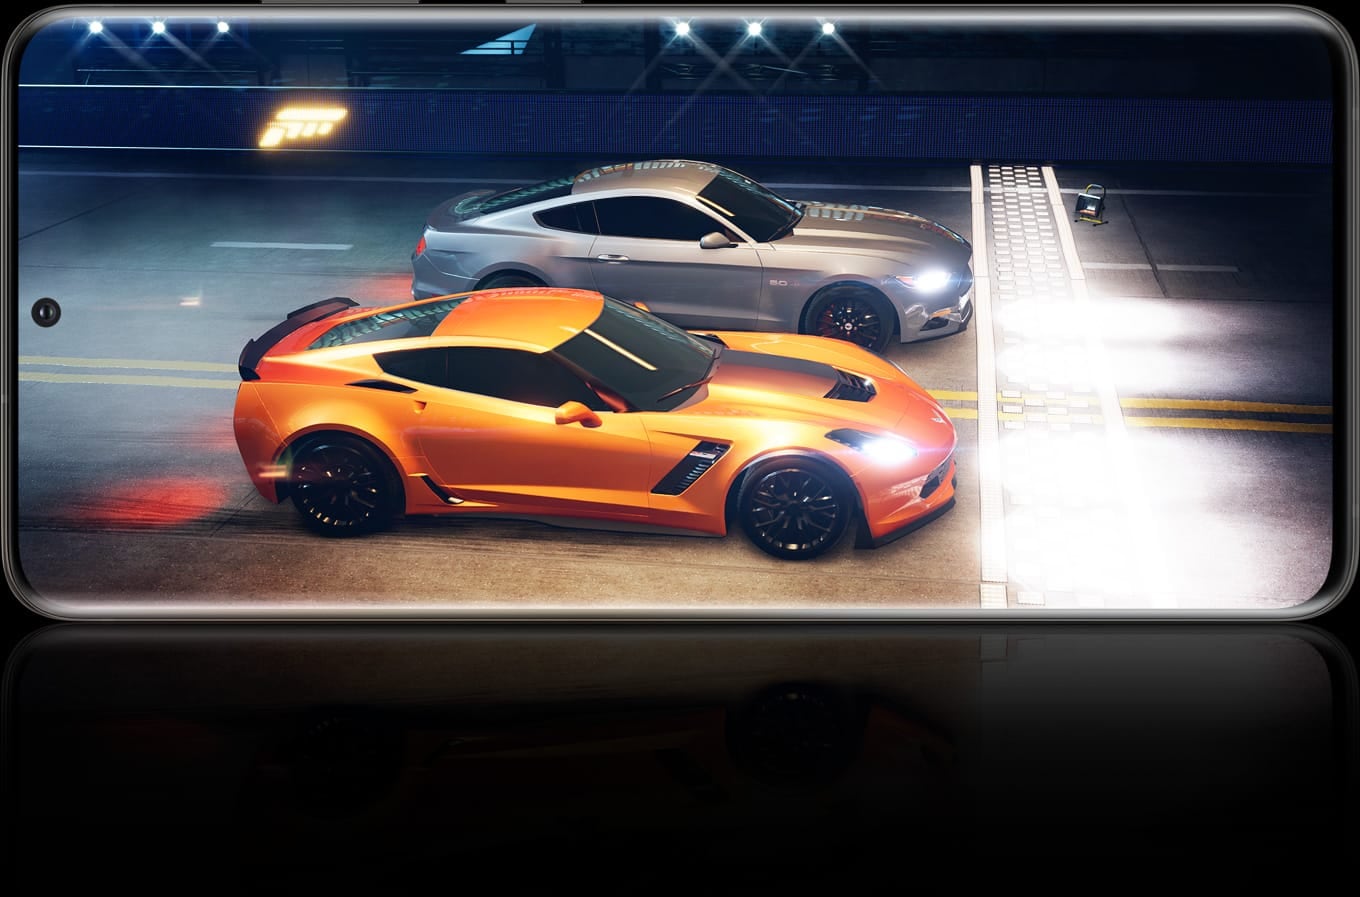 Galaxy S20 Ultra seen in landscape mode with an image from the game Forza Street onscreen